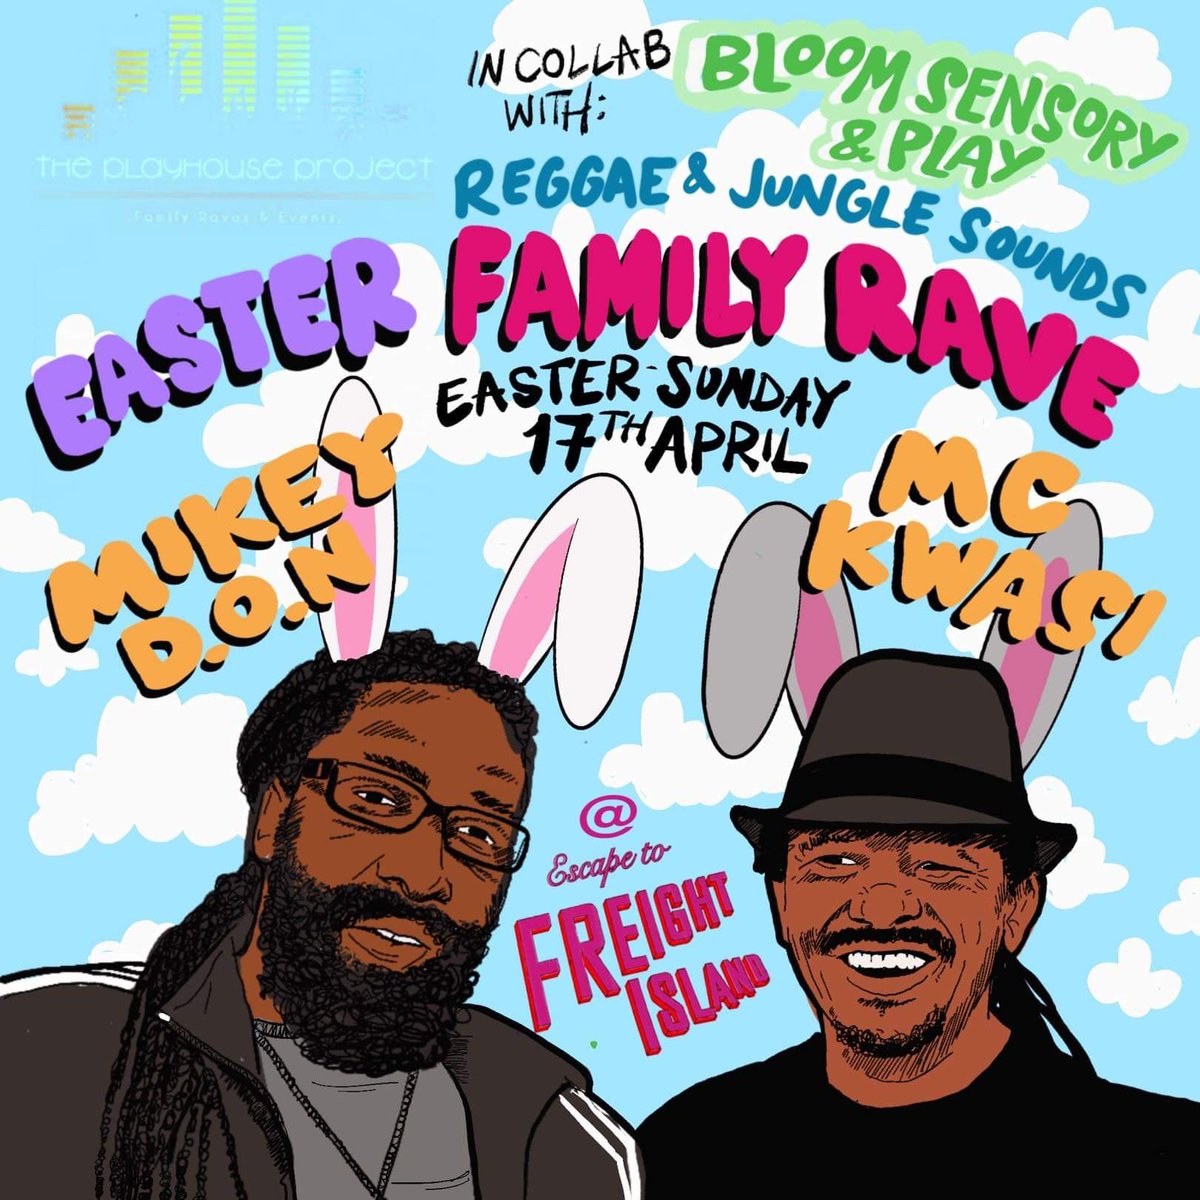 THE PLAYHOUSE PROJECT EASTER RAVE W/ MIKEY D.O.N & MC KWASI @freightisland 🚧 Bunny performers, bubble and hoop sessions, arts & crafts, inflatables, sensory sessions, chocolate eggs and more. 🐰🐥 In collaboration with @bloombabyclass Tickets 👇 go.kaboodle.co.uk/etfi-playhouse…